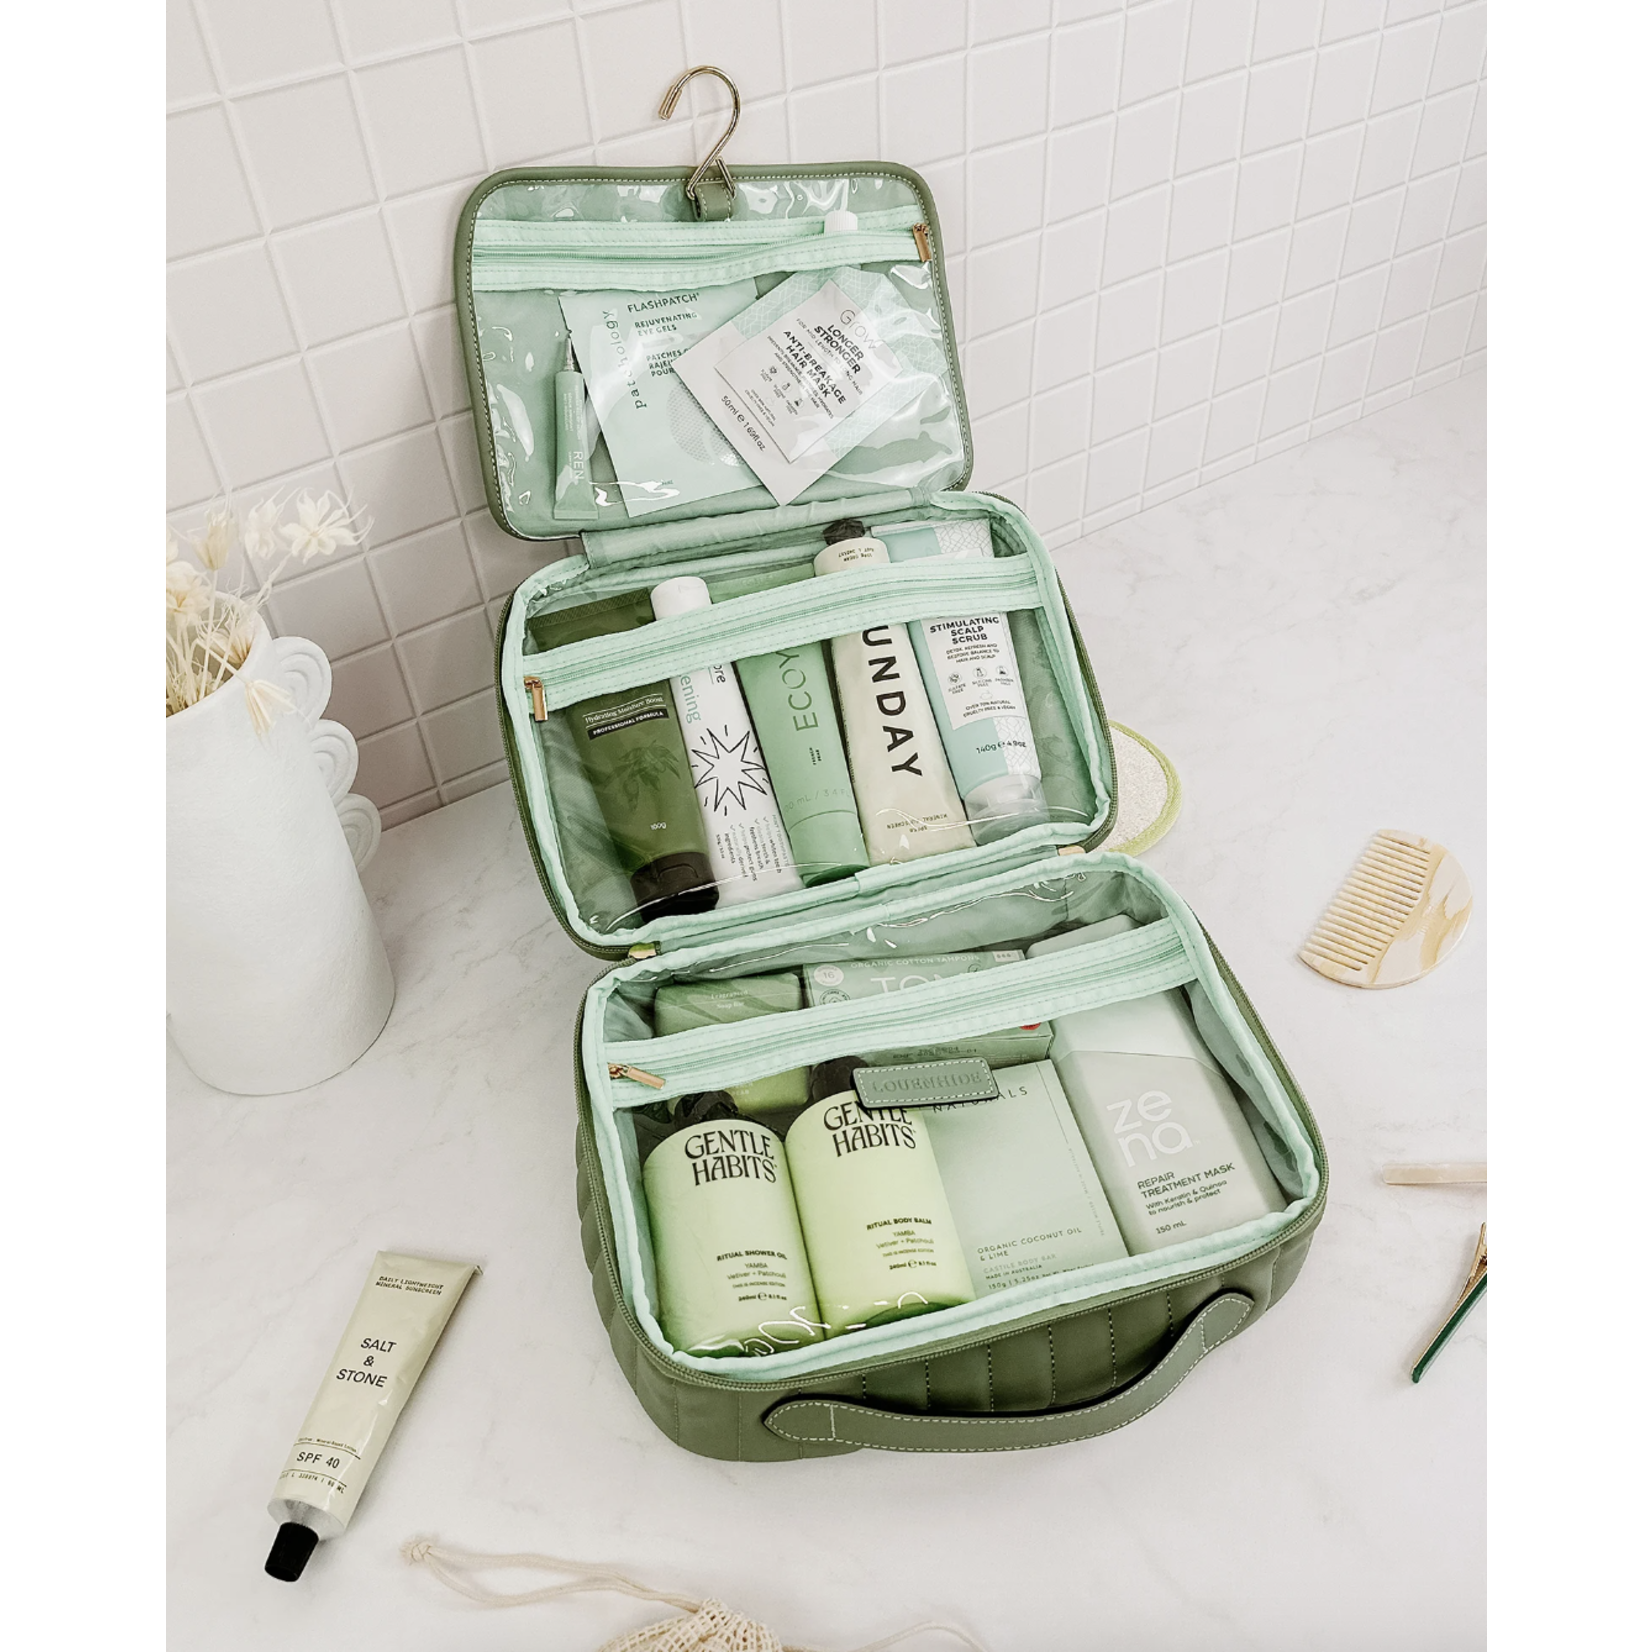 Louenhide Maggie Hanging Toiletry Case